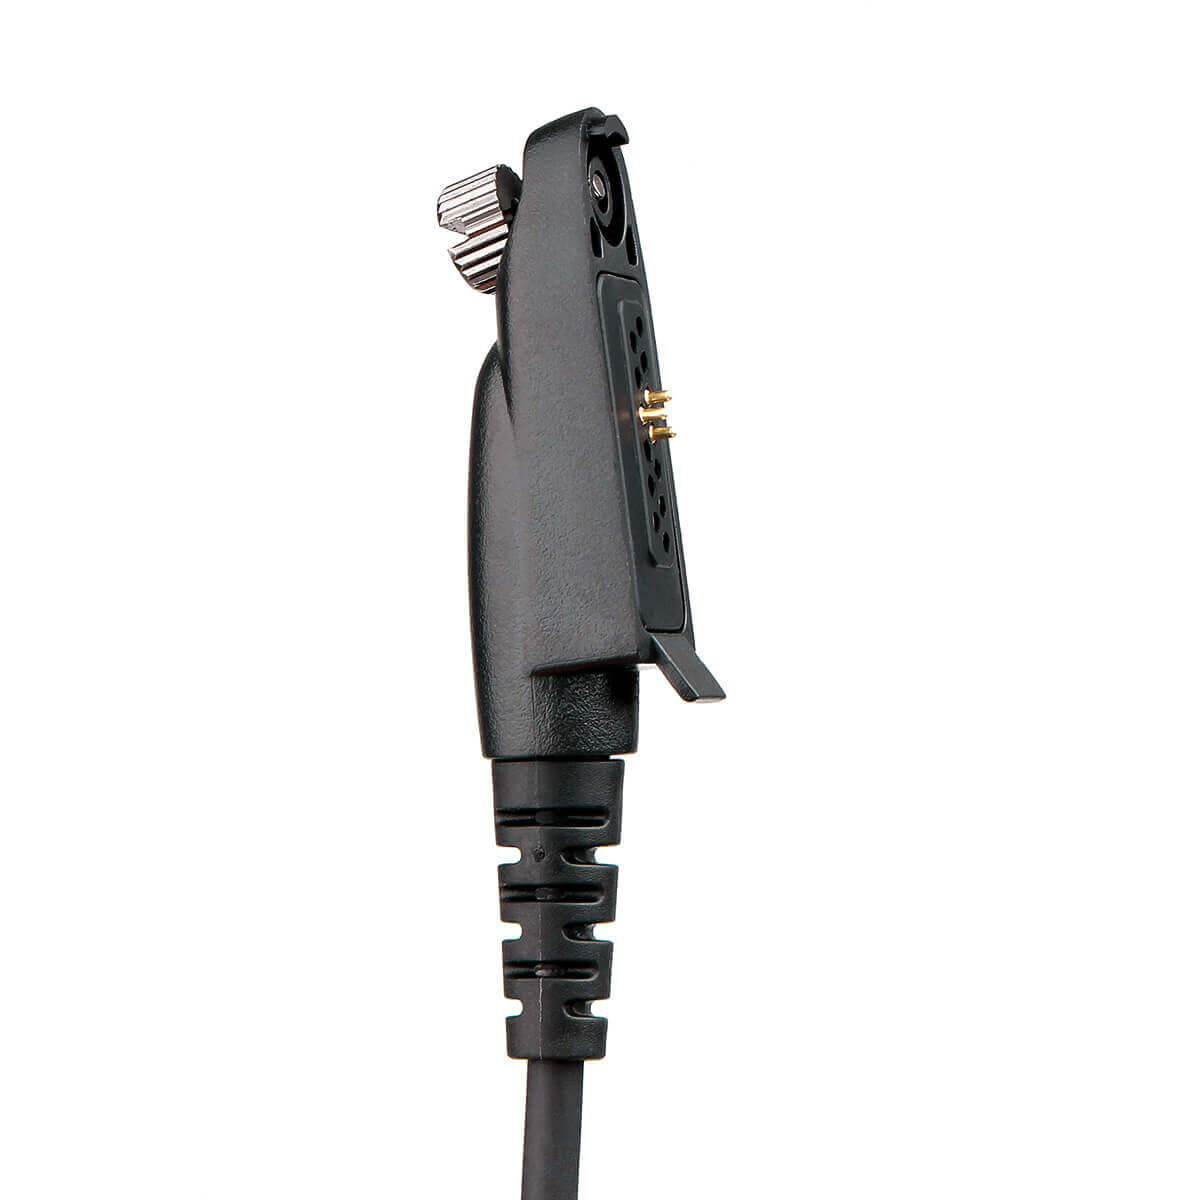 Original USB Programming Cable for Ailunce HD1